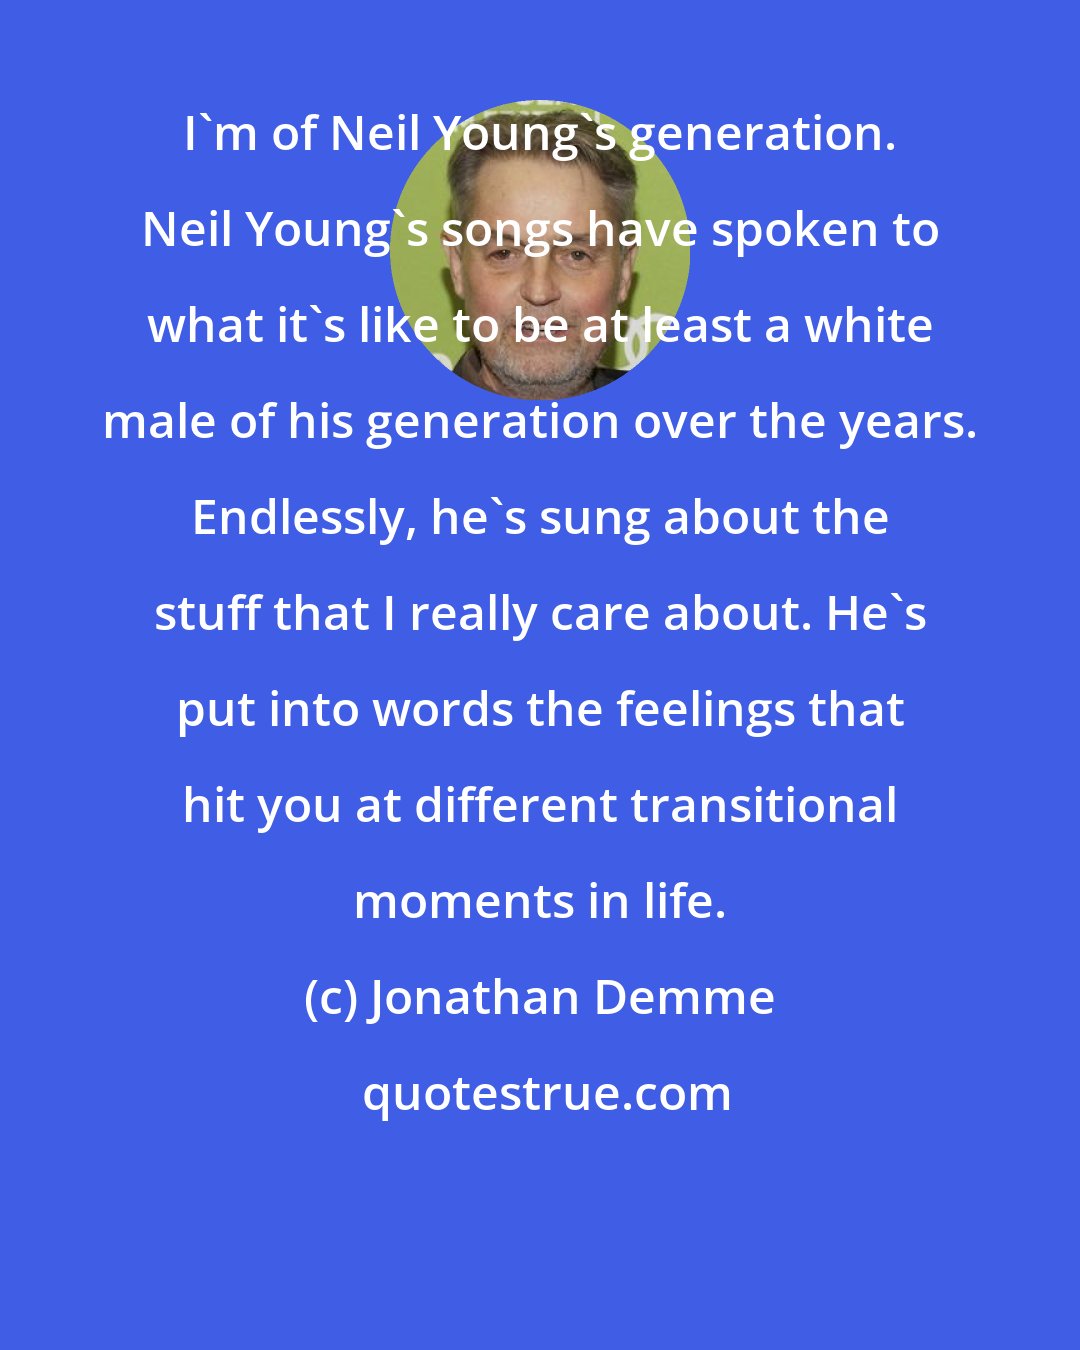 Jonathan Demme: I'm of Neil Young's generation. Neil Young's songs have spoken to what it's like to be at least a white male of his generation over the years. Endlessly, he's sung about the stuff that I really care about. He's put into words the feelings that hit you at different transitional moments in life.